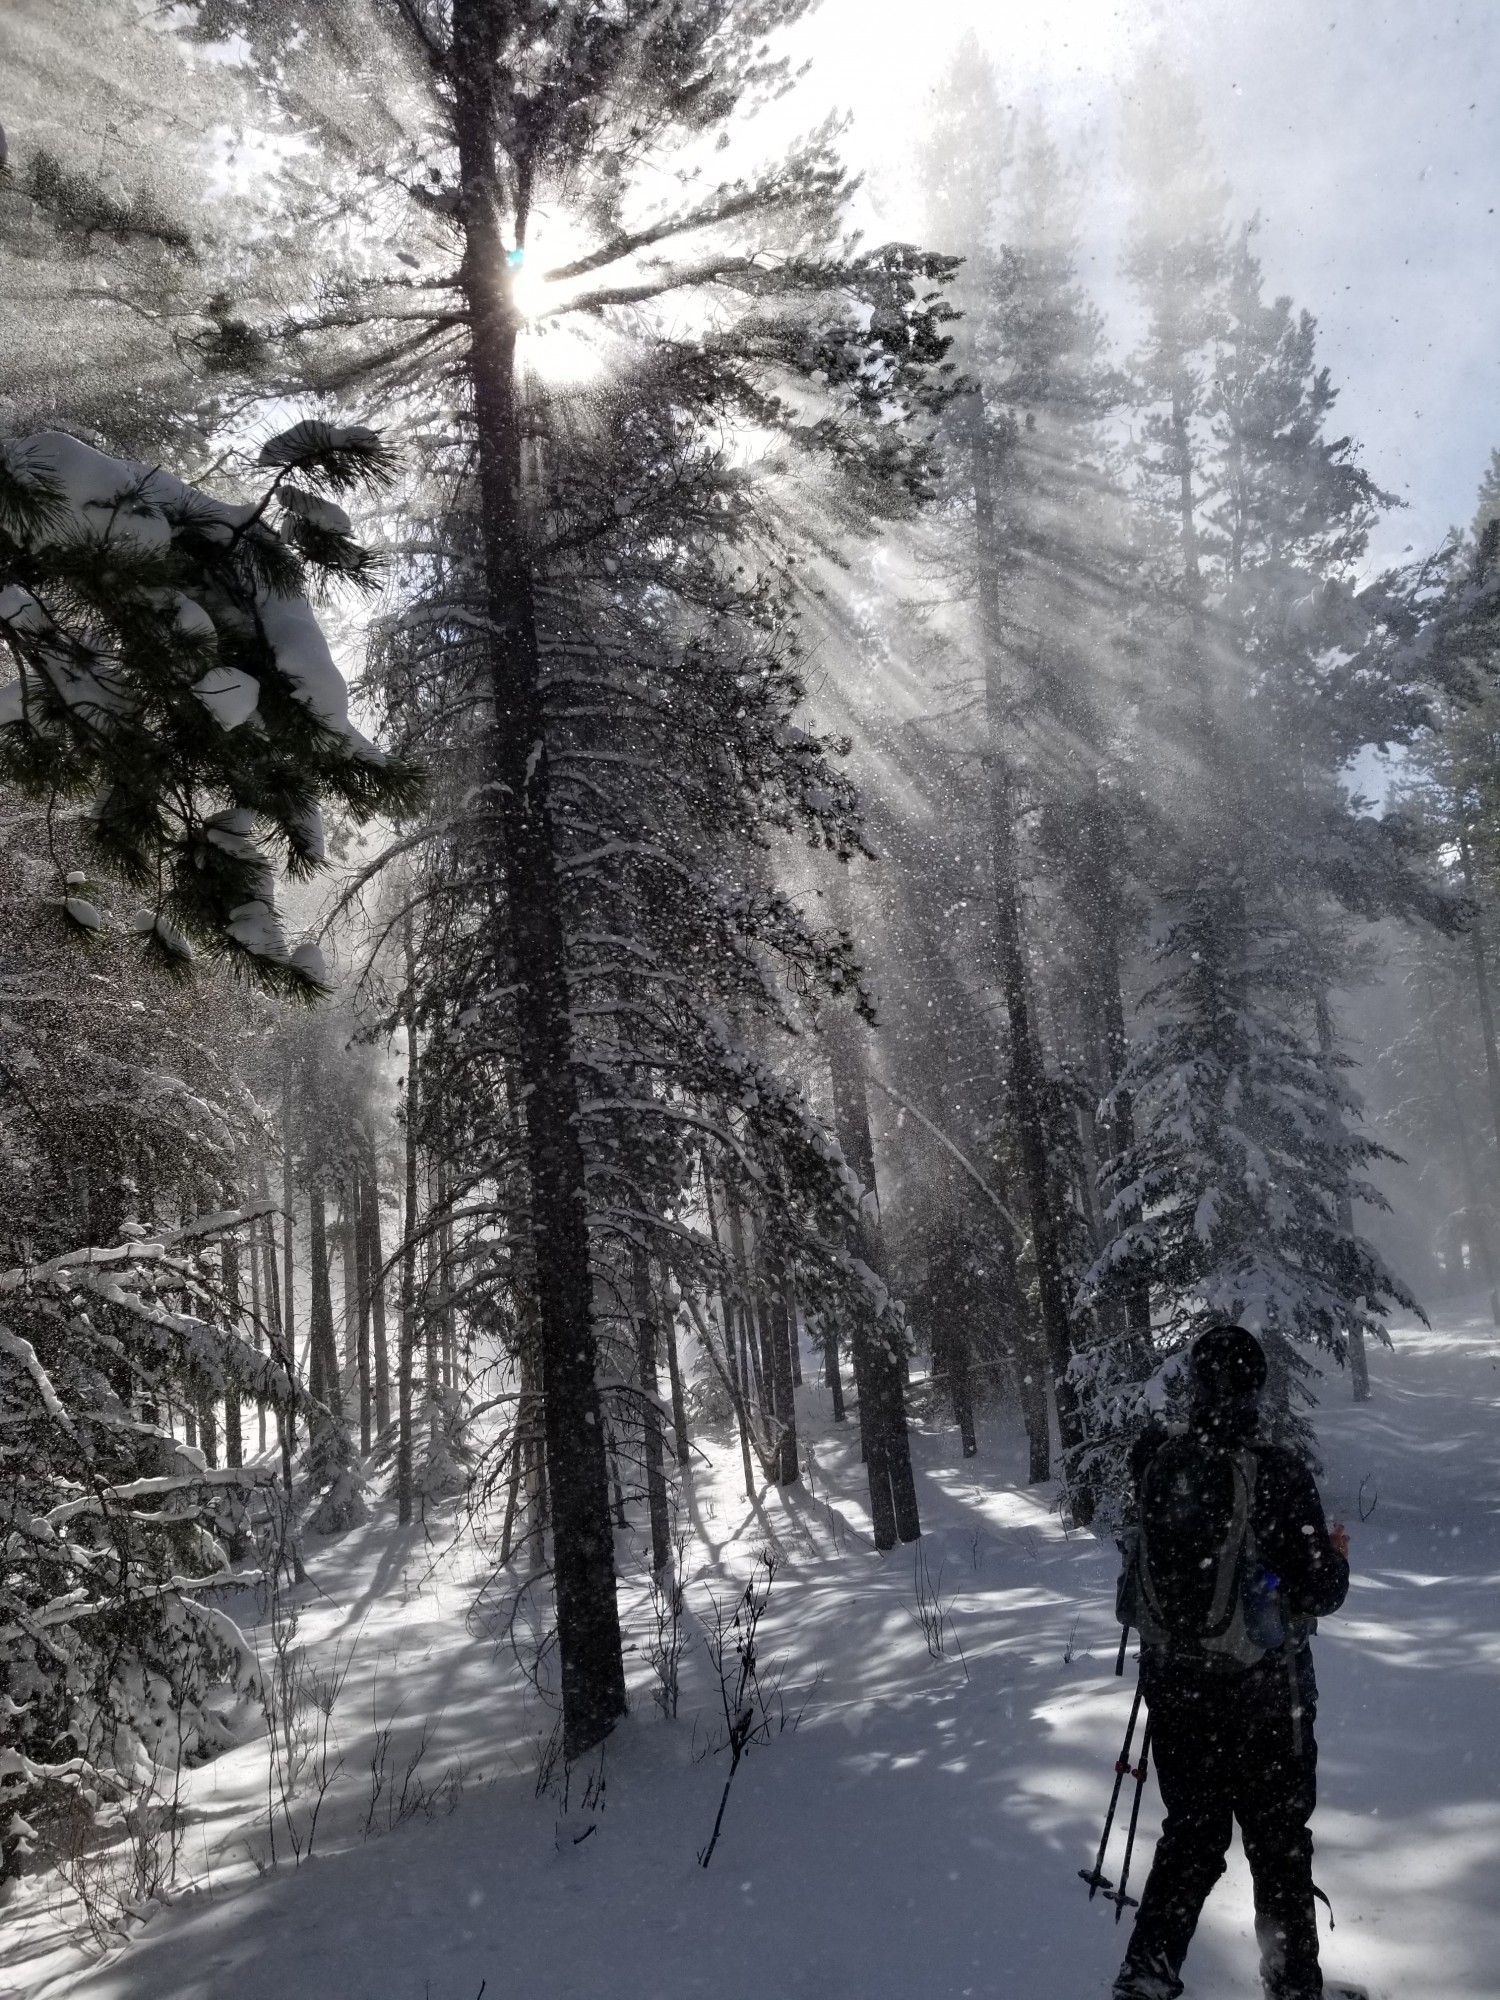 winter photo competition: person walking with sun filtering through trees